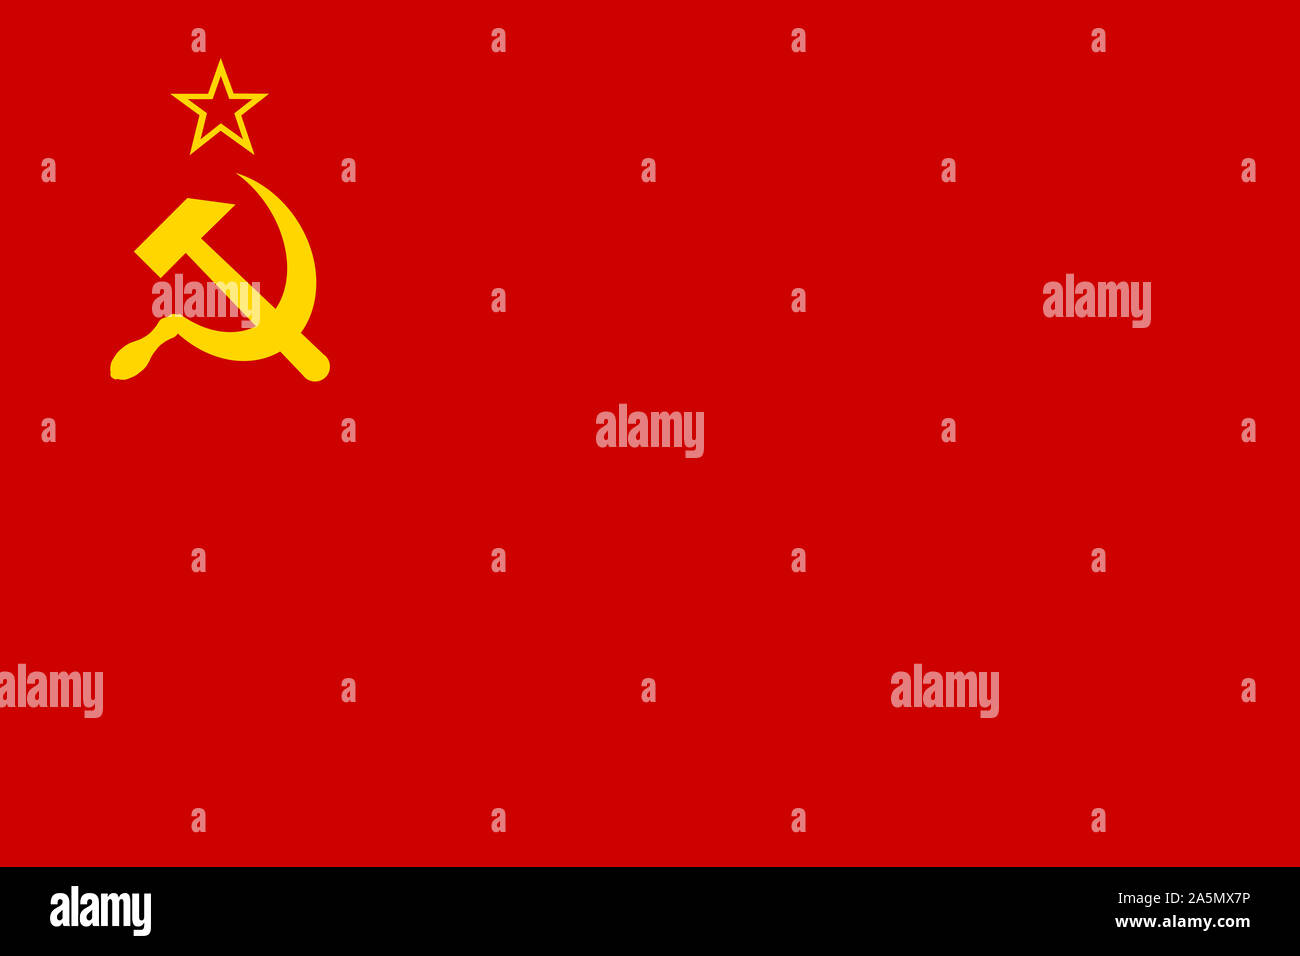 A USSR flag illustration background red yellow hammer sickle CCCP Stock Photo